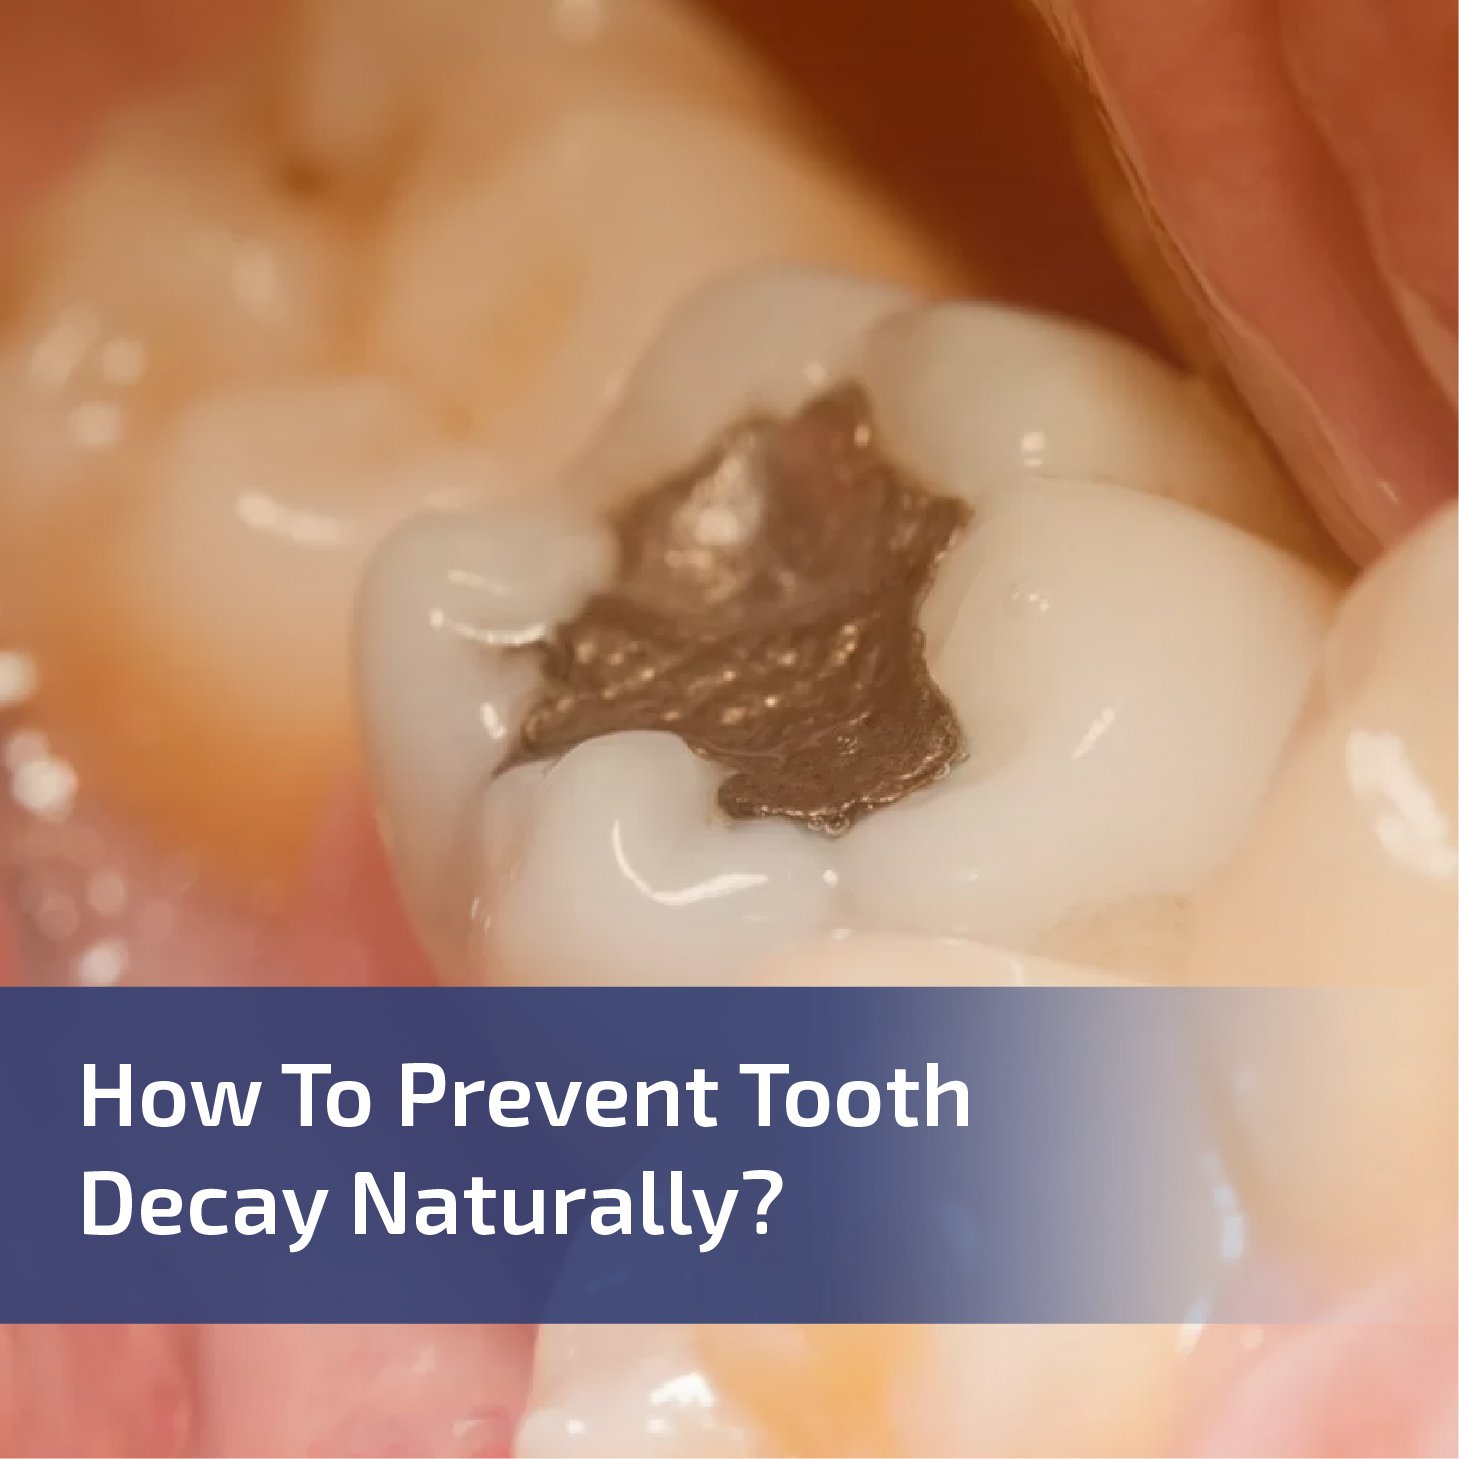 How to Prevent Tooth Decay Naturally